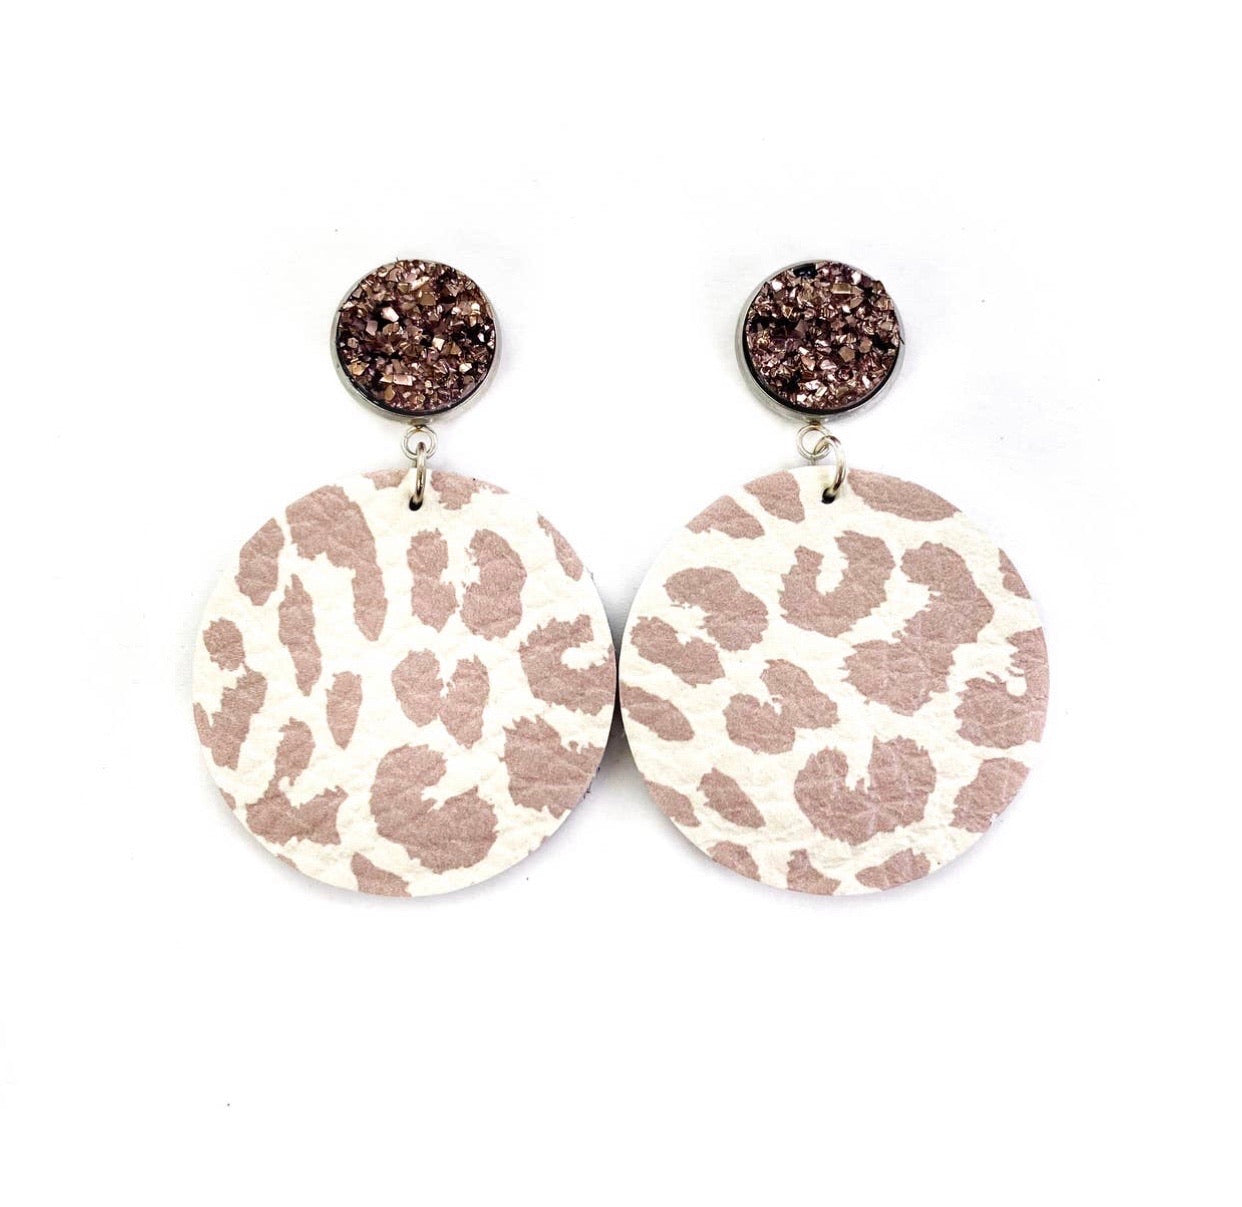 Druzy Stud Tan Leopard Earrings - Corinne an Affordable Women's Clothing Boutique in the US USA